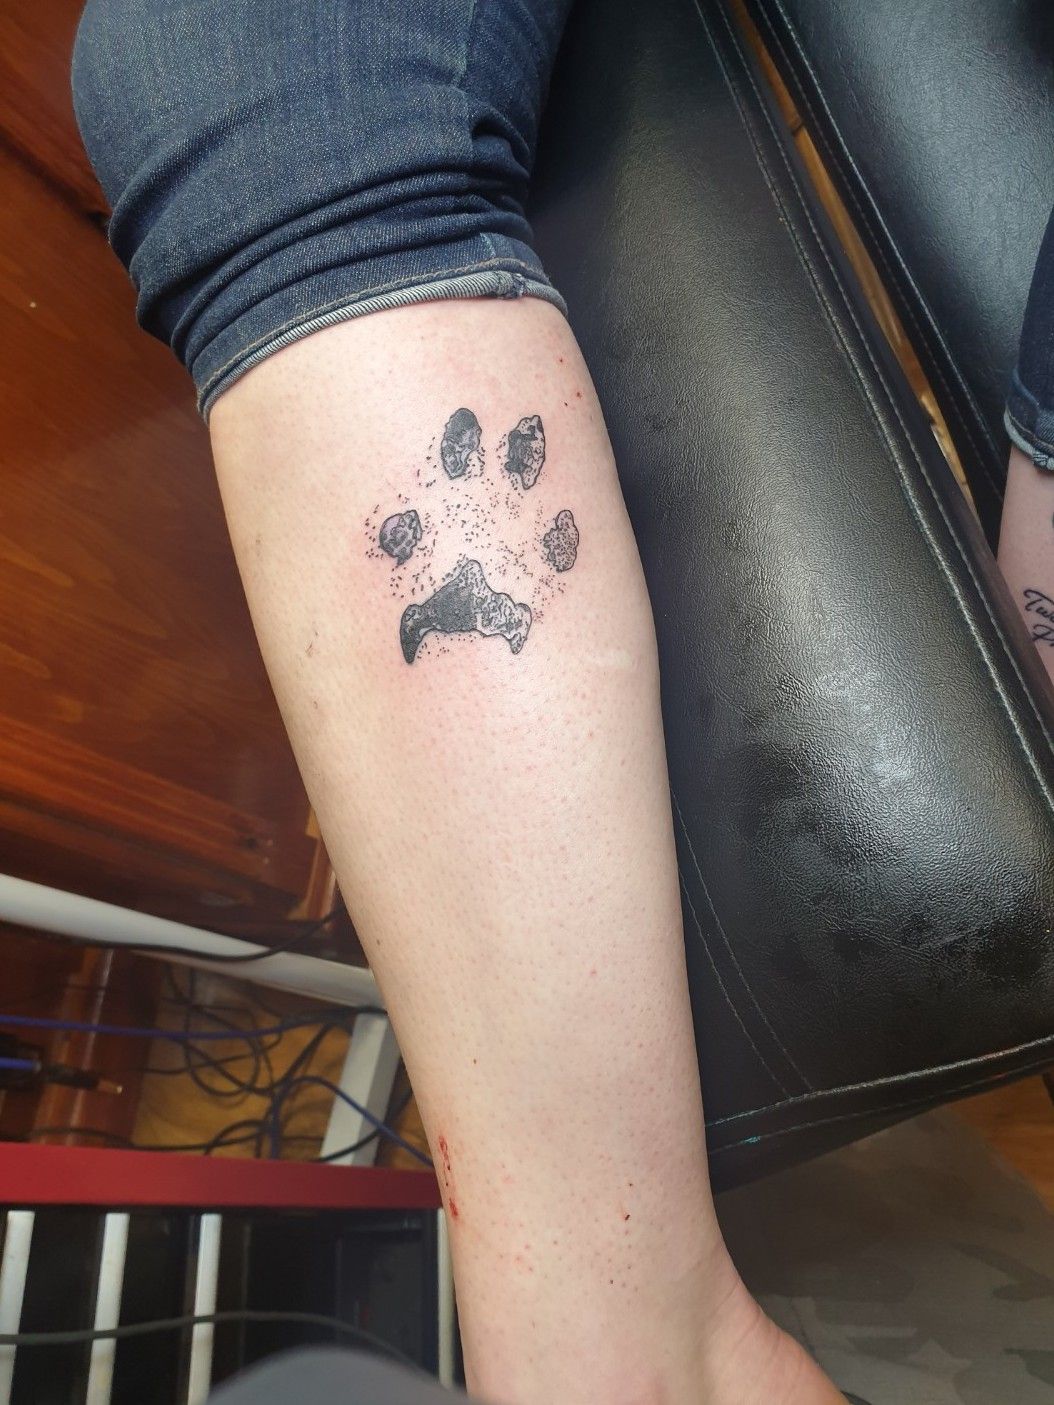 Paw tattoo on the thigh